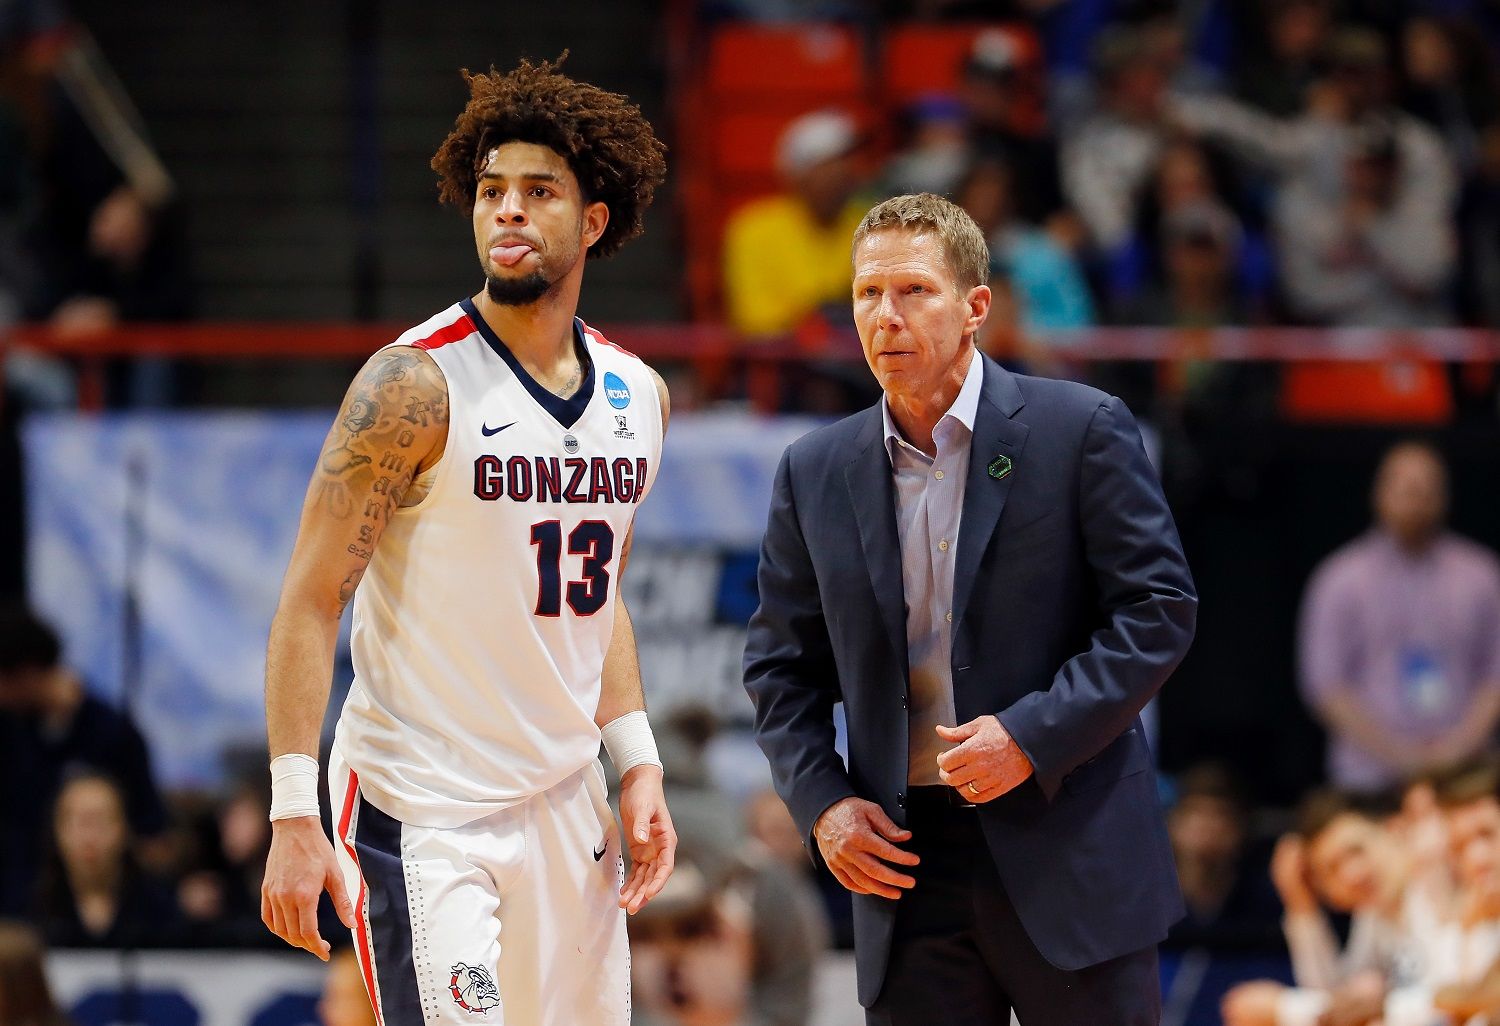 BOISE, ID - MARCH 17:  Josh Perkins #13 stands with head coach Mark Few of the Gonzaga Bulldogs during the second half against the Ohio State Buckeyes in the second round of the 2018 NCAA Men's Basketball Tournament at Taco Bell Arena on March 17, 2018 in Boise, Idaho.  (Photo by Kevin C. Cox/Getty Images)